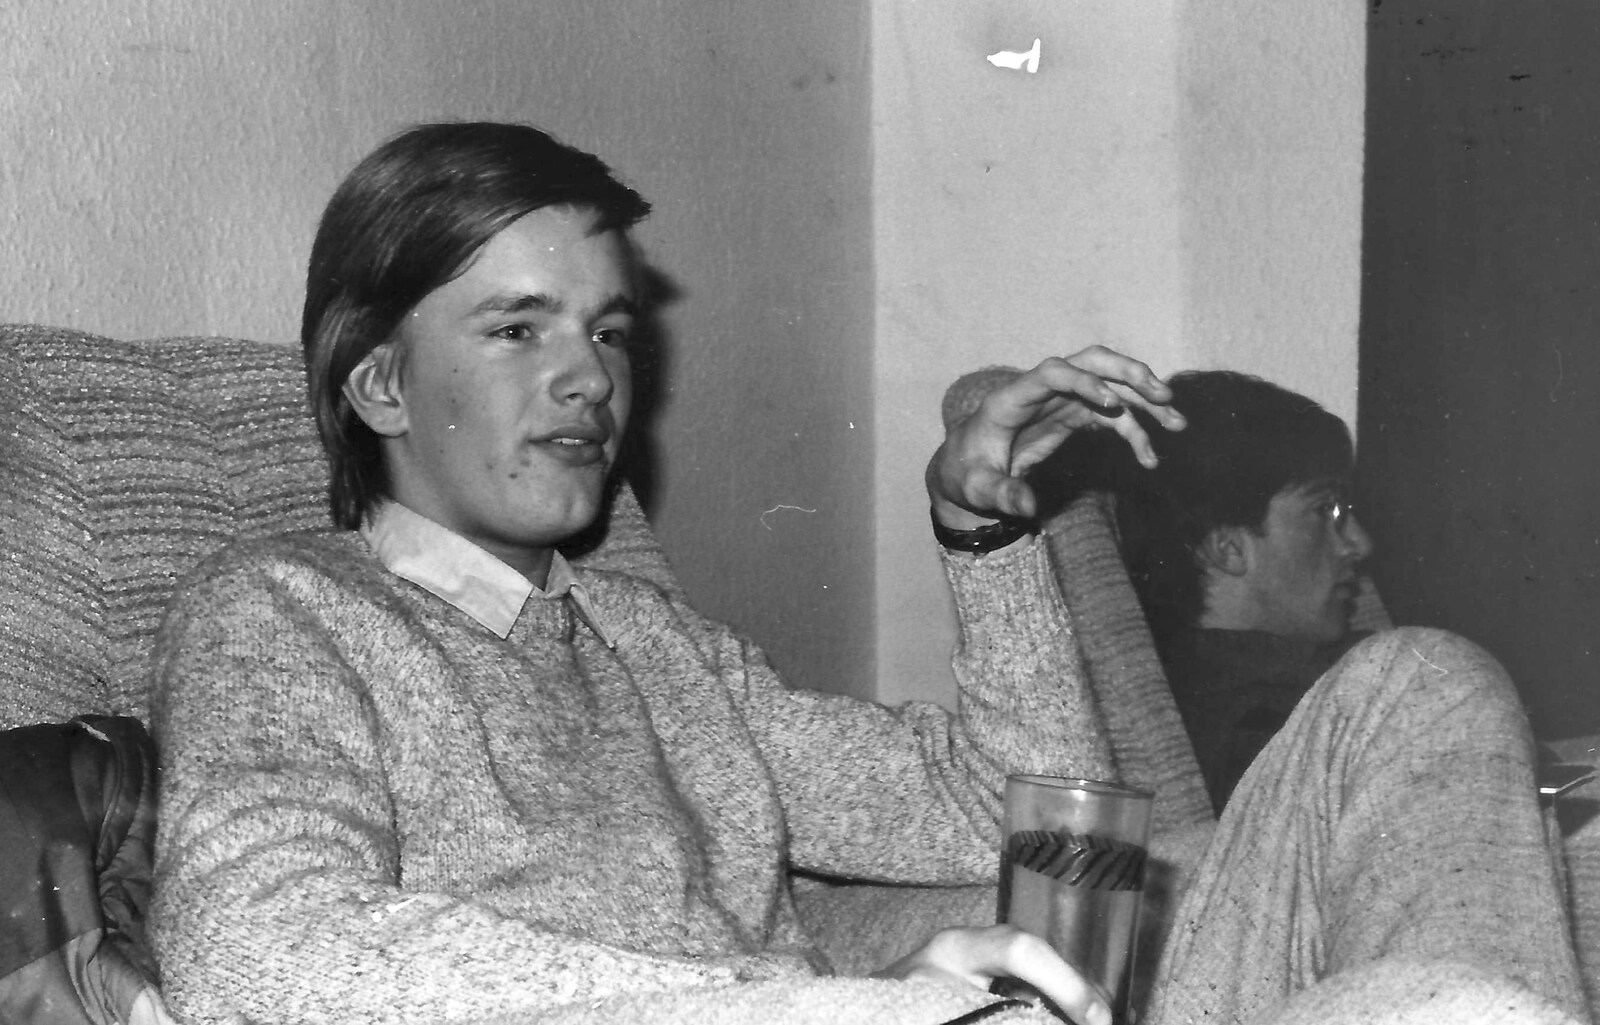 Nosher, with James in the background from Uni: The First Year in Black and White, Plymouth Polytechnic, Devon - 8th April 1986